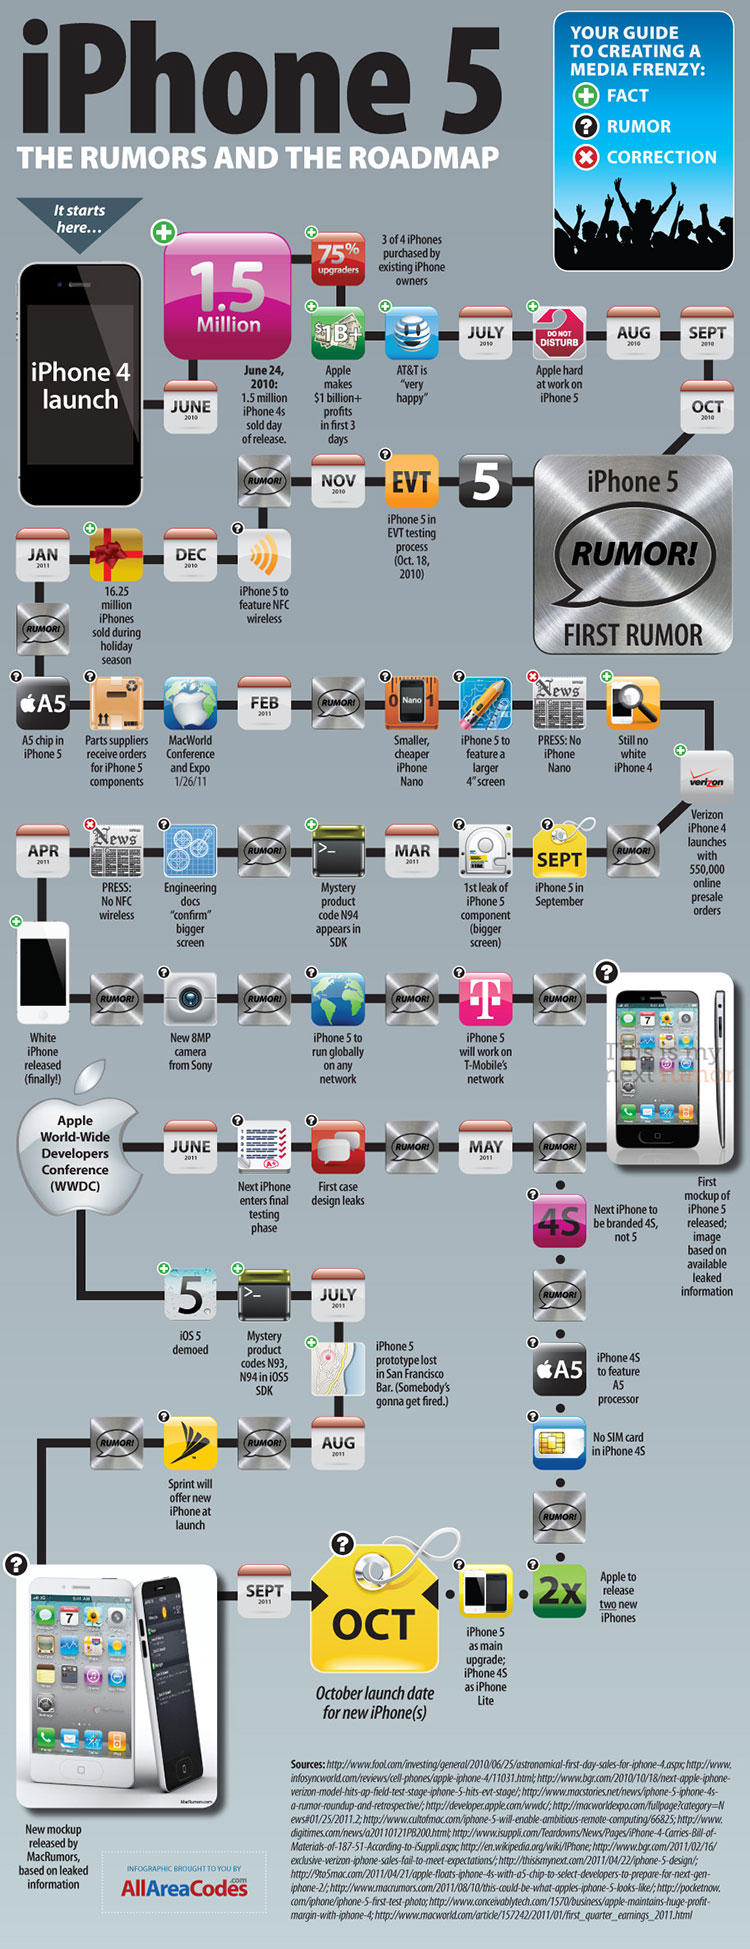 iPhone 5 Roadmap: Facts and Rumors [InfoGraphic]